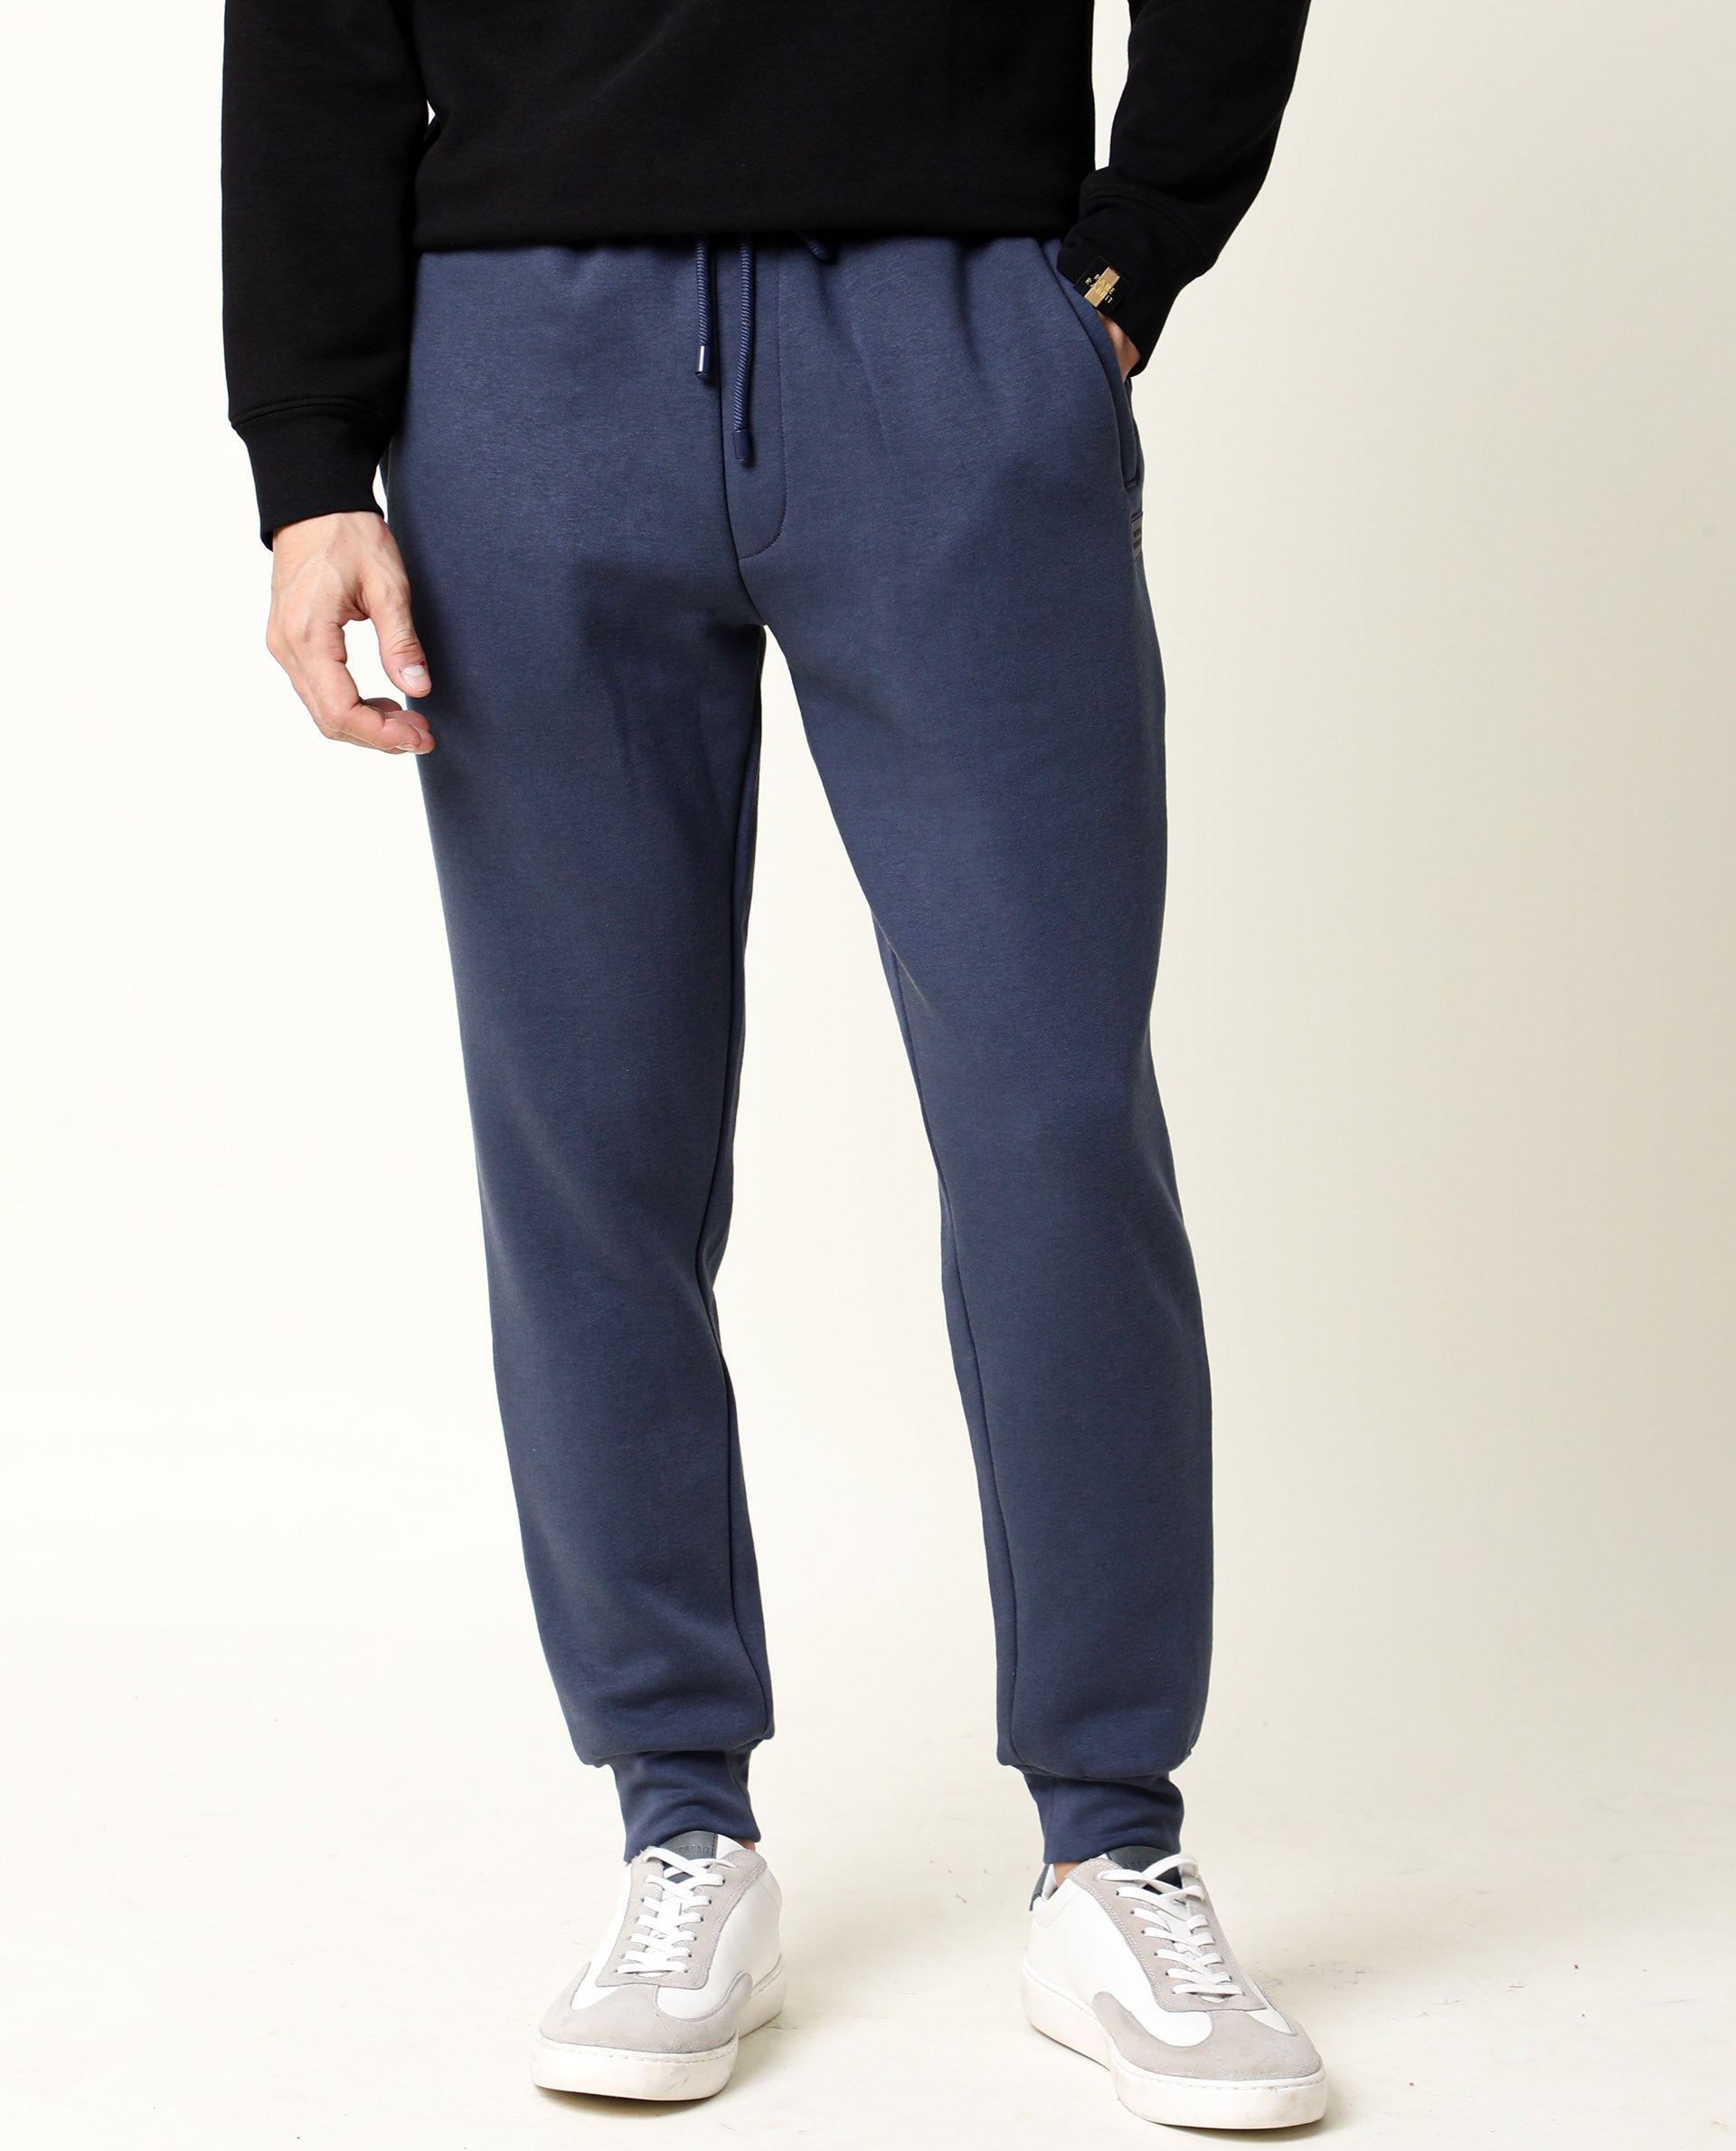 Mens Blue Track Pants Manufacturer From Hodal Haryana India  Latest Price